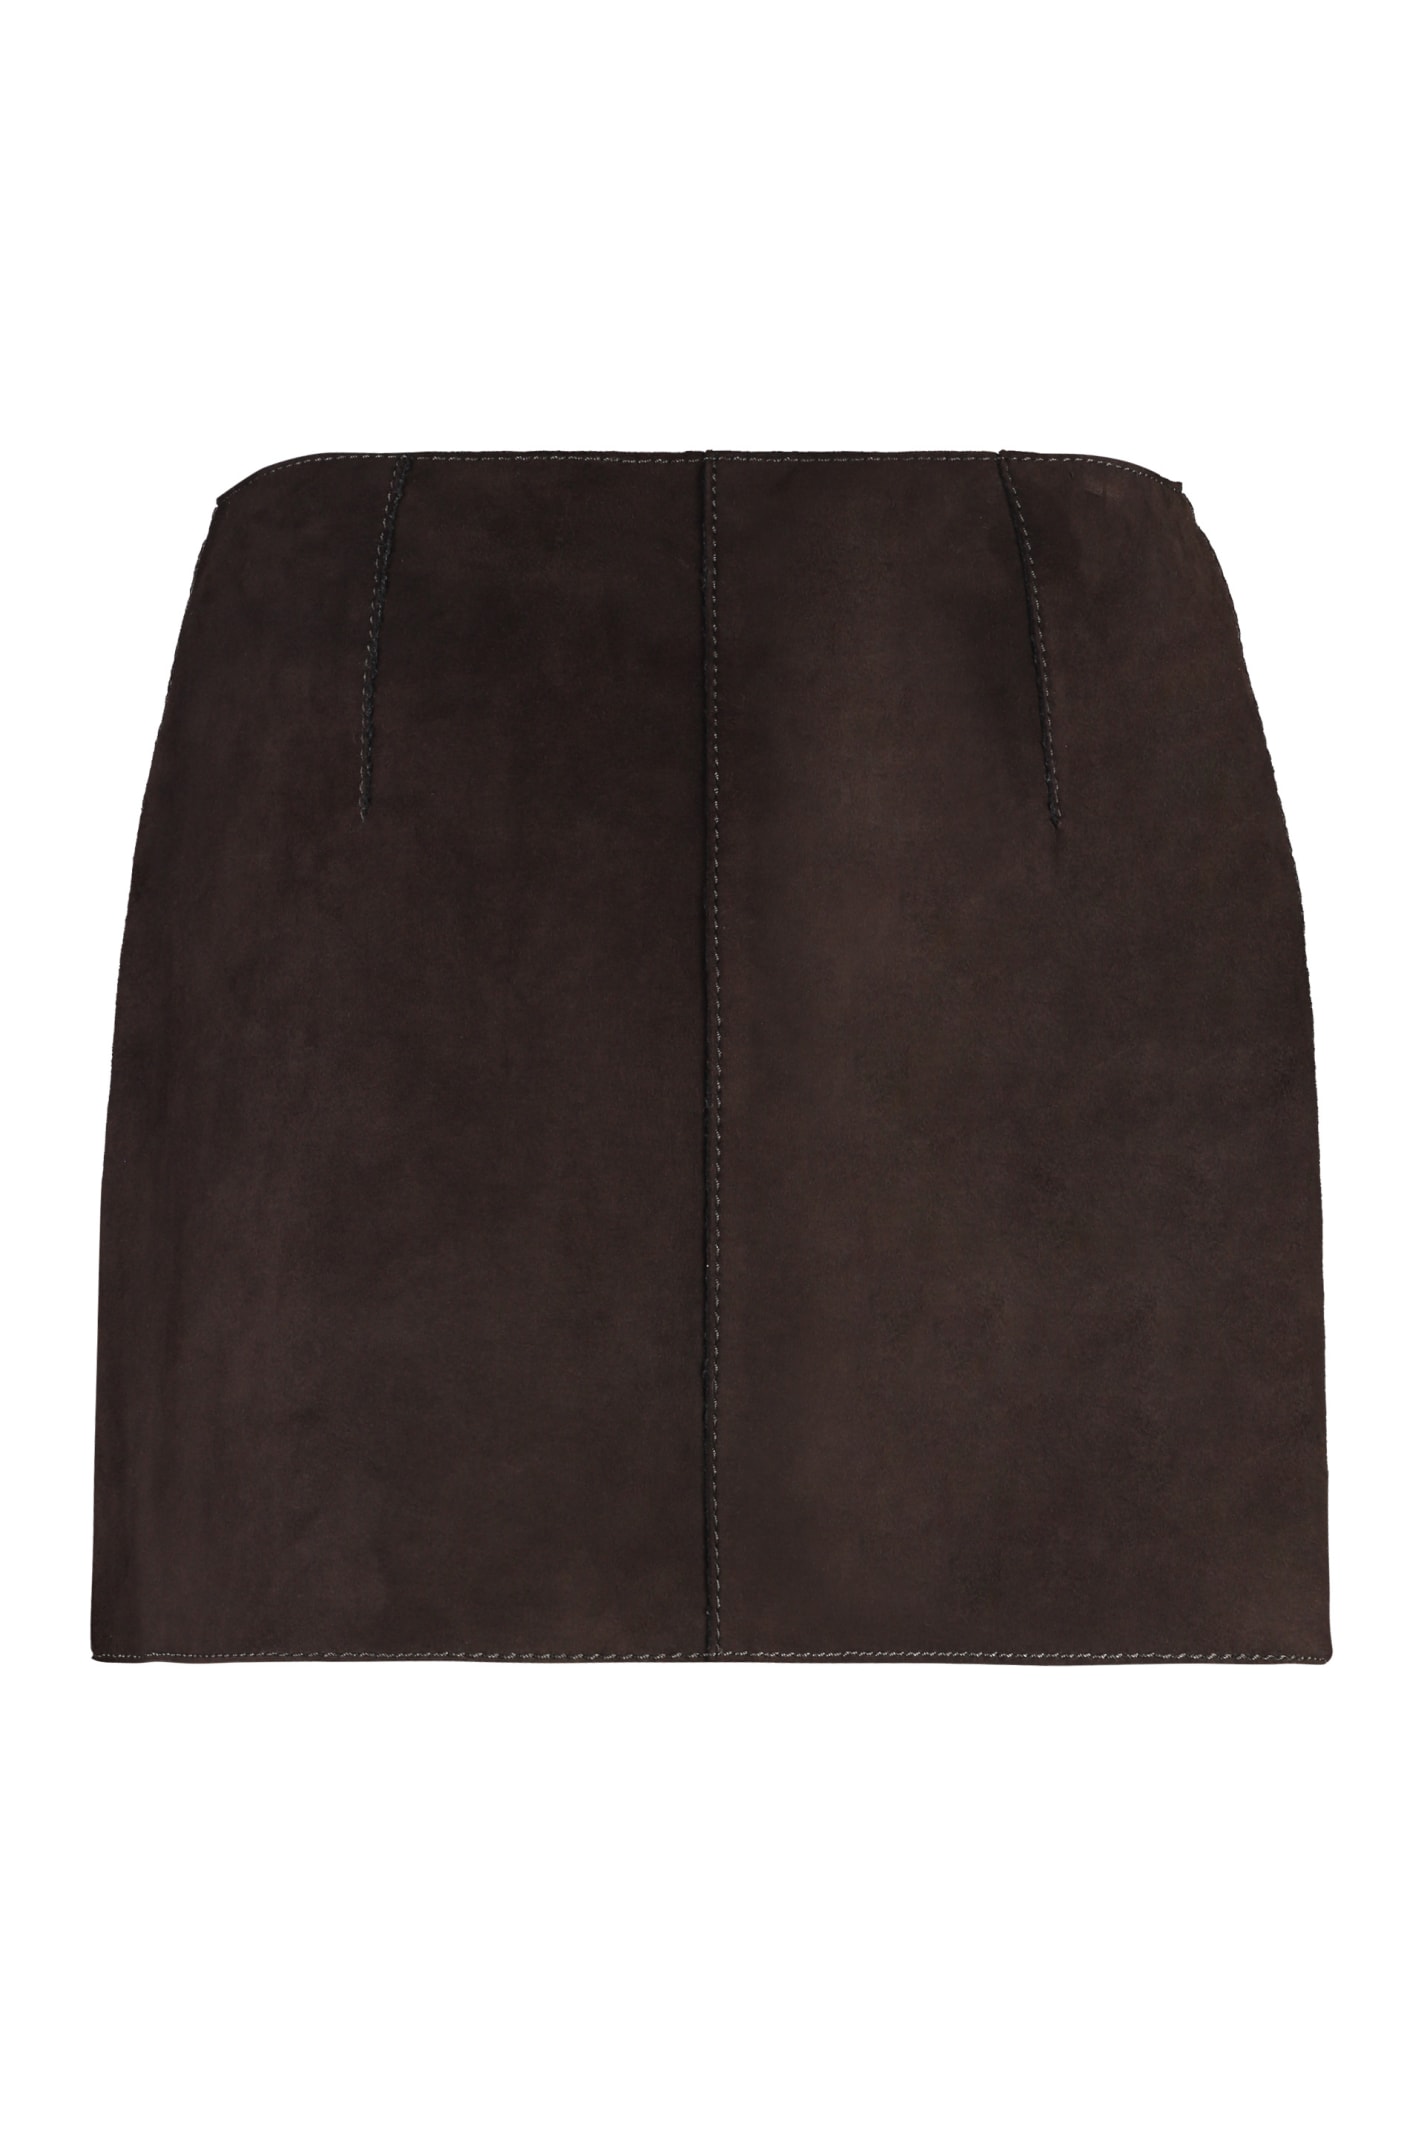 P.a.r.o.s.h Leather Mini Skirt In Brown